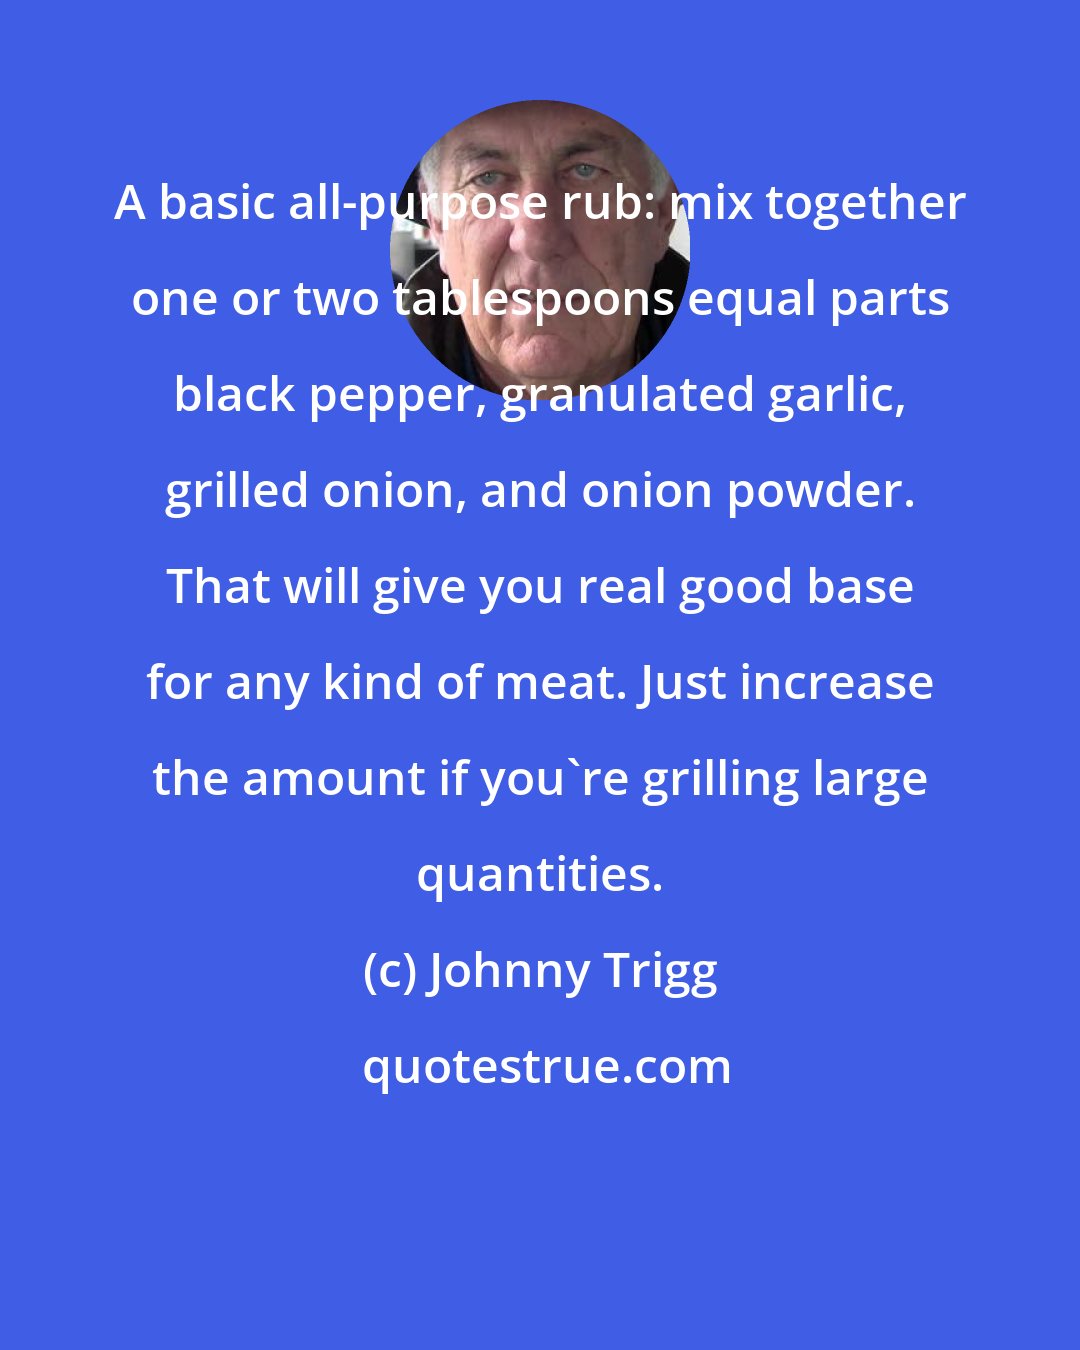 Johnny Trigg: A basic all-purpose rub: mix together one or two tablespoons equal parts black pepper, granulated garlic, grilled onion, and onion powder. That will give you real good base for any kind of meat. Just increase the amount if you're grilling large quantities.